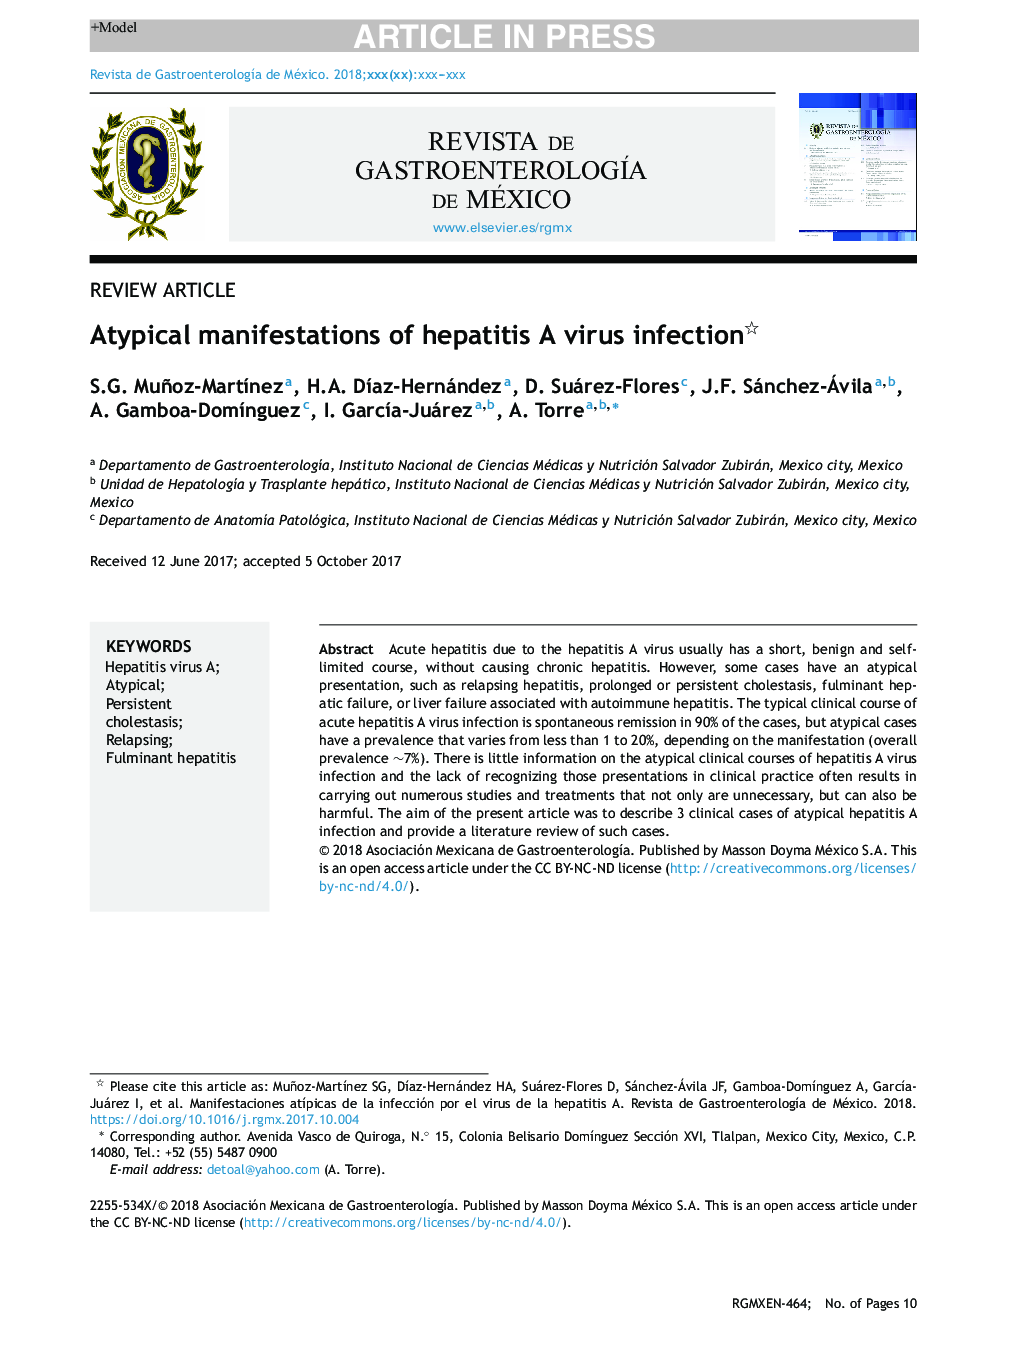 Atypical manifestations of hepatitis A virus infection